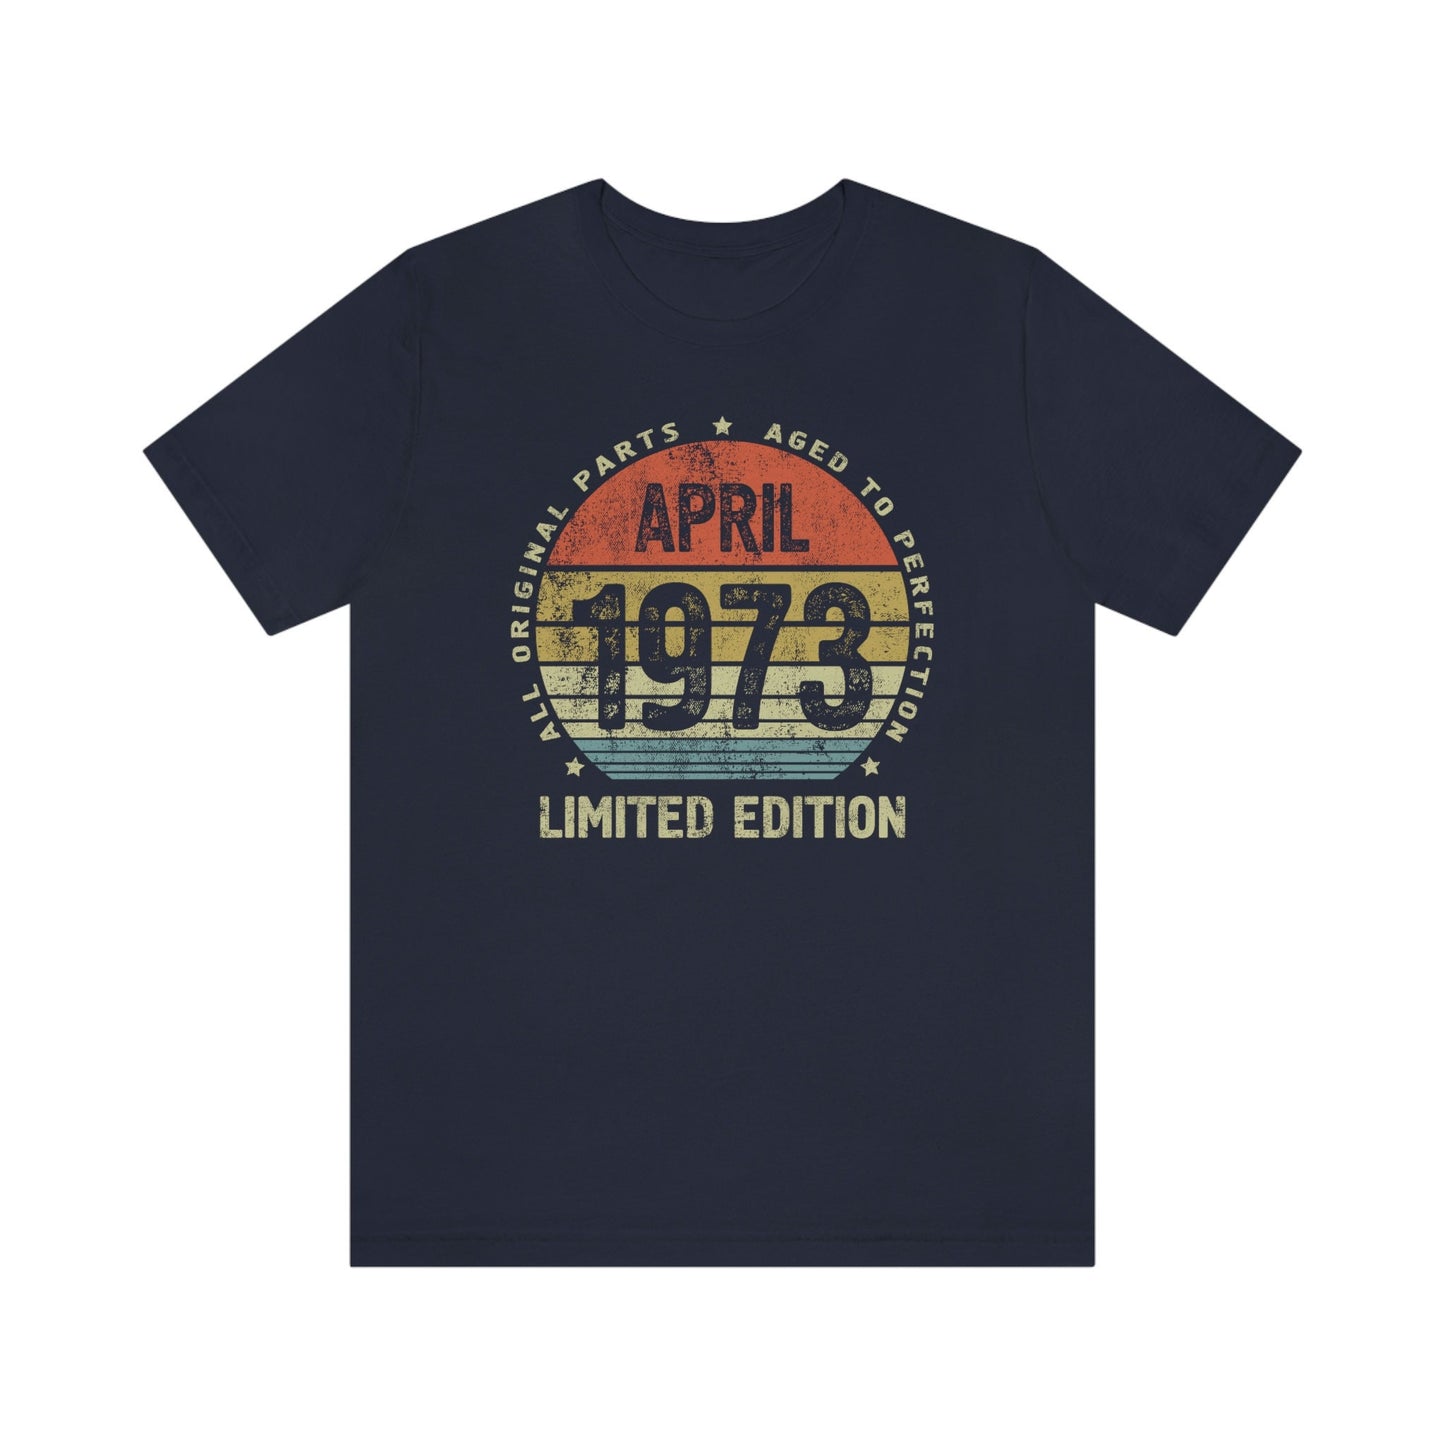 April 1973 birthday shirt for women or men, Gift shirt for wife or husband